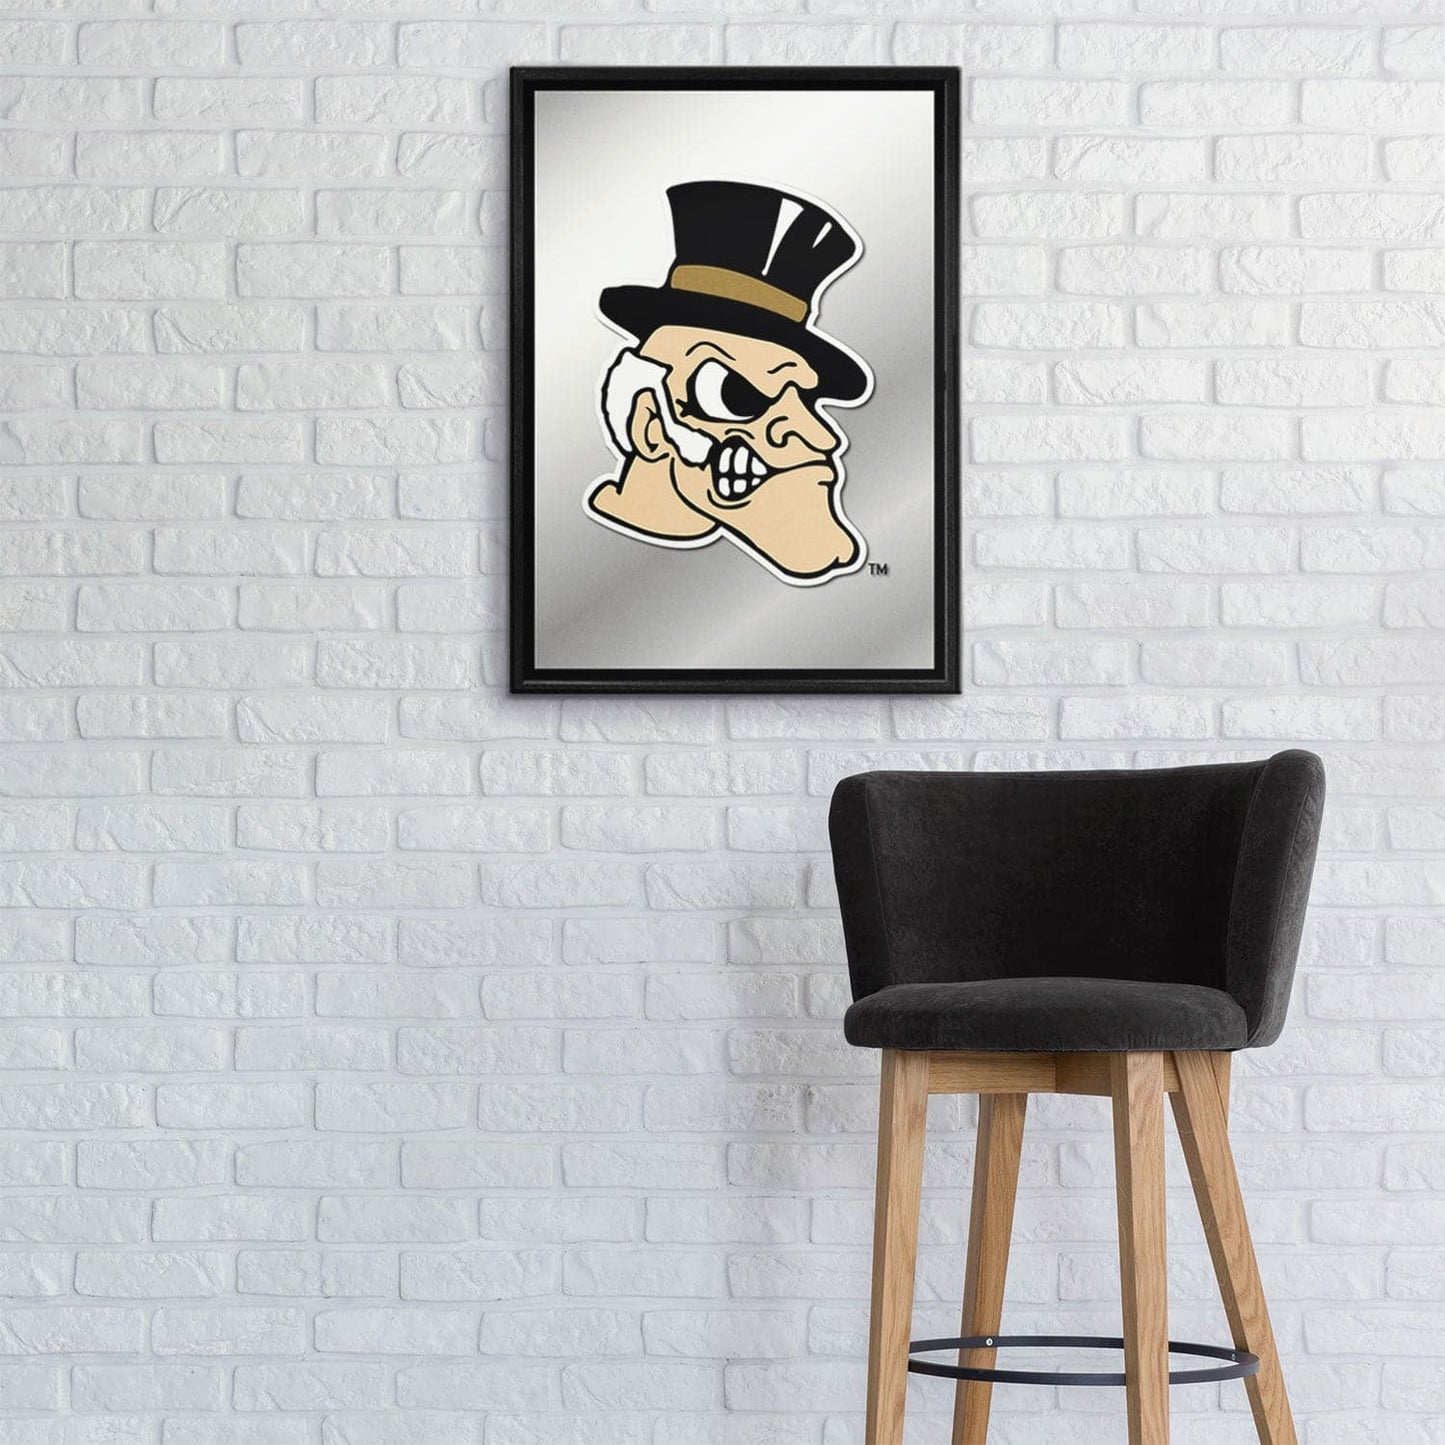 Wake Forest Demon Deacons: Mascot - Framed Mirrored Wall Sign - The Fan-Brand